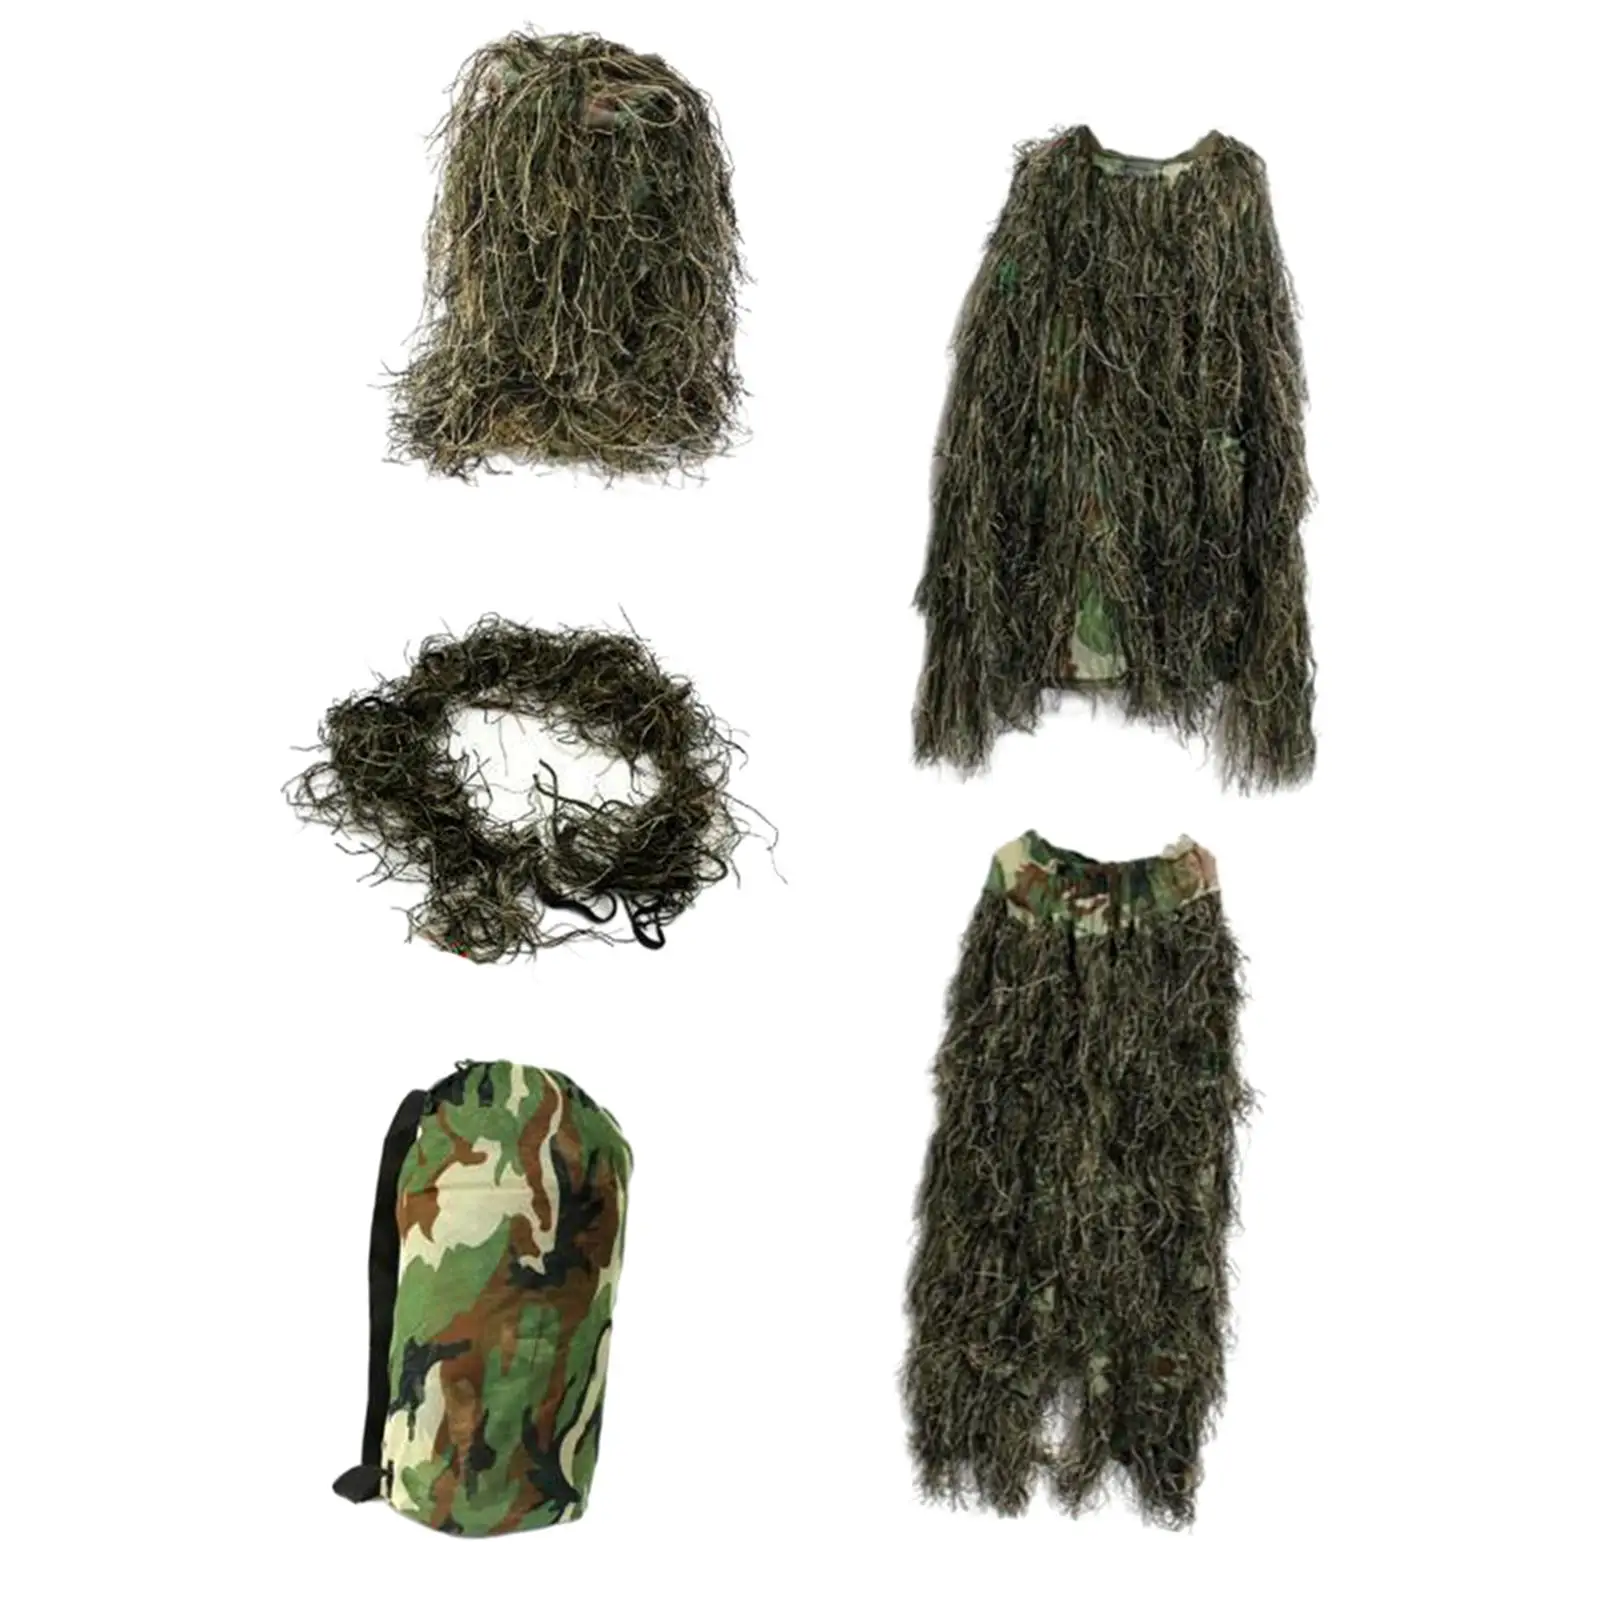 Kids Ghillie Suit Apparel Fancy Dress Disguise Jacket Clothes Outfit Pants Clothing for Game Photography Outdoor Jungle Hunting